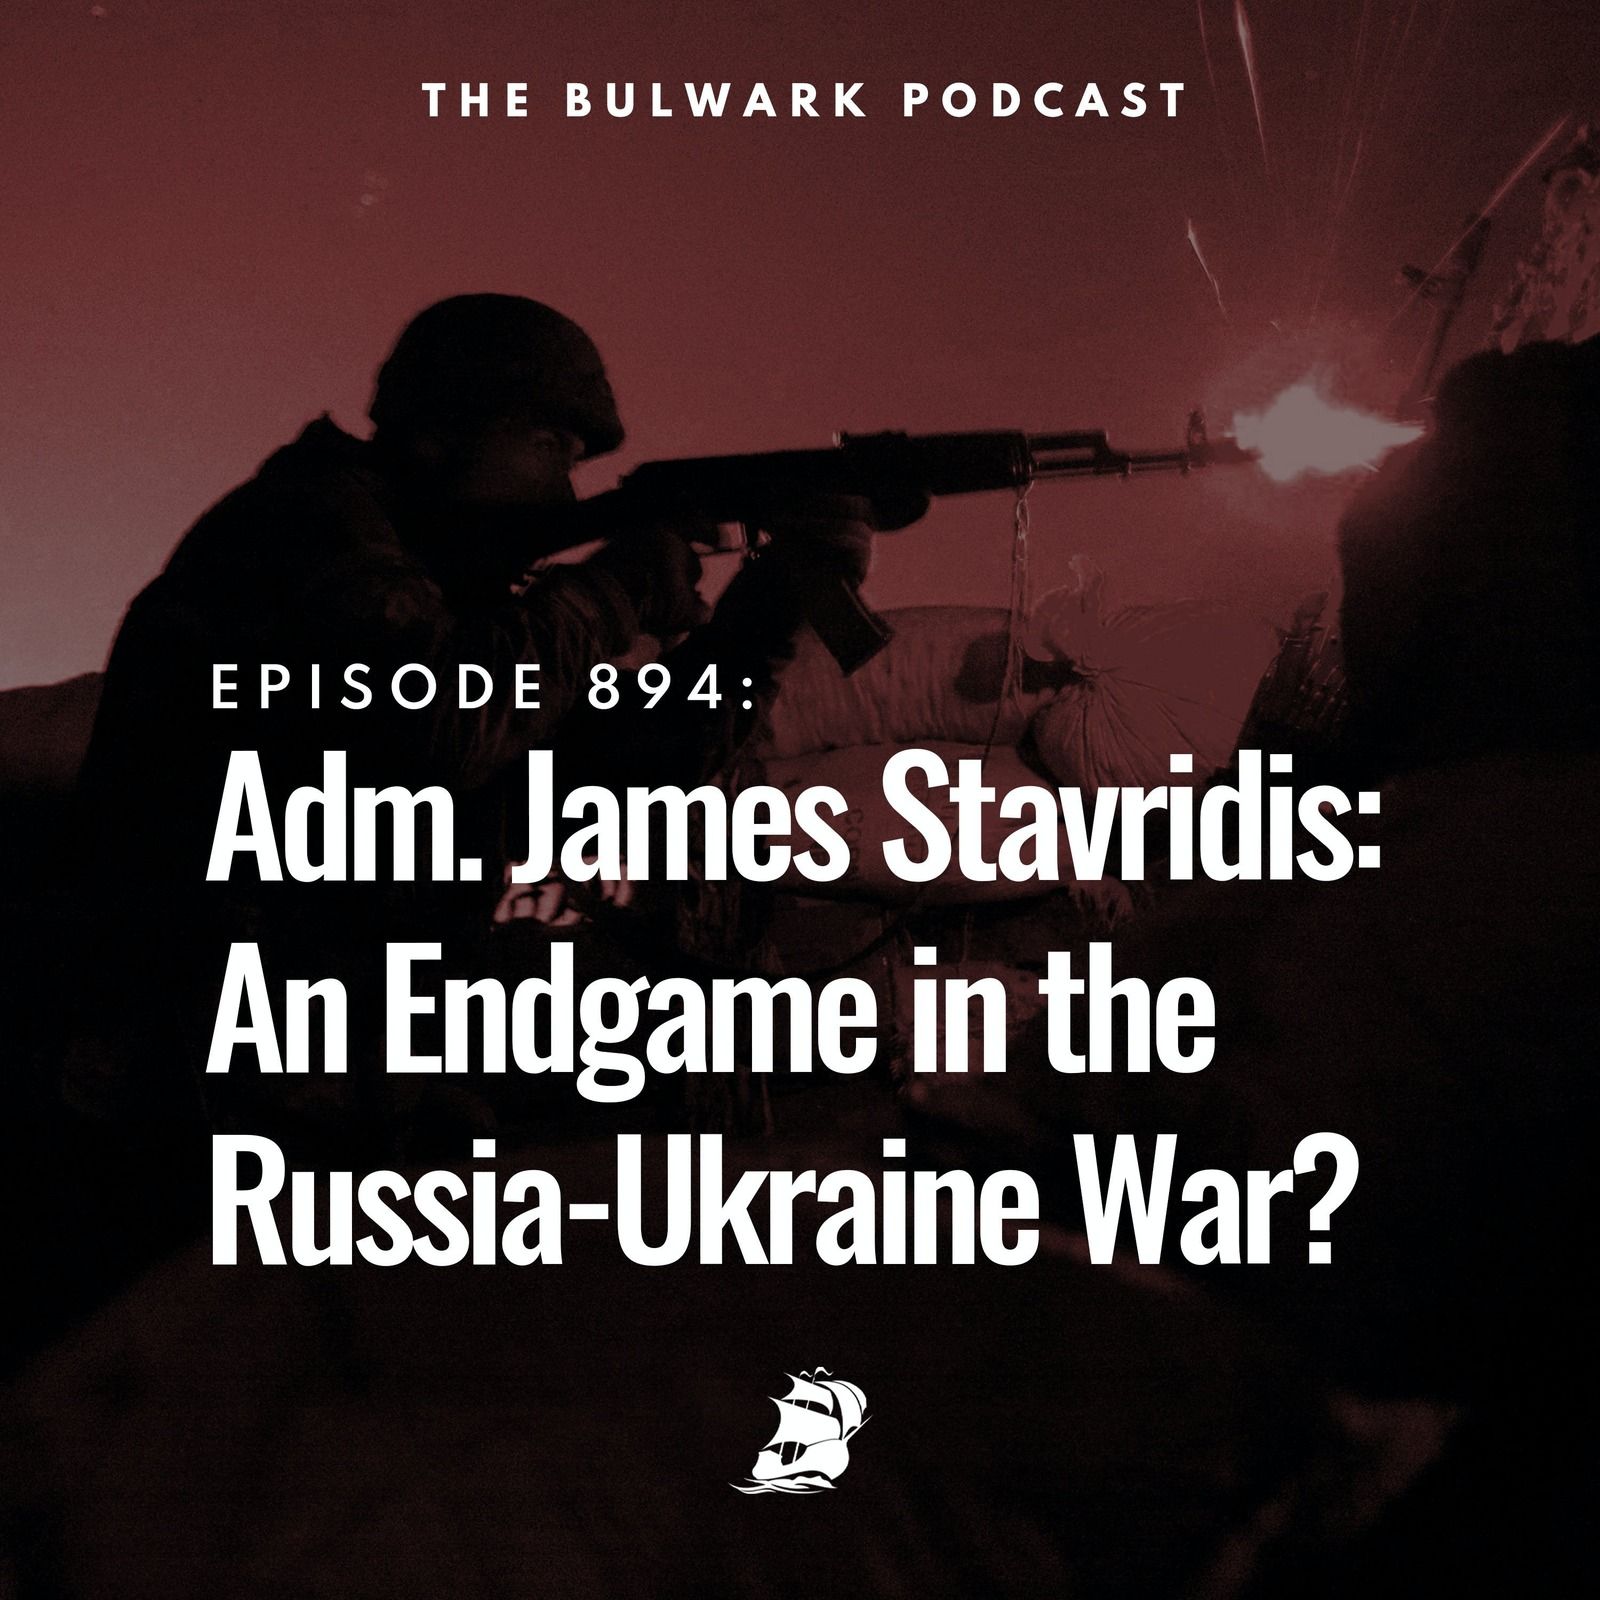 Adm. James Stavridis: An Endgame in the Russia-Ukraine War? by The Bulwark Podcast